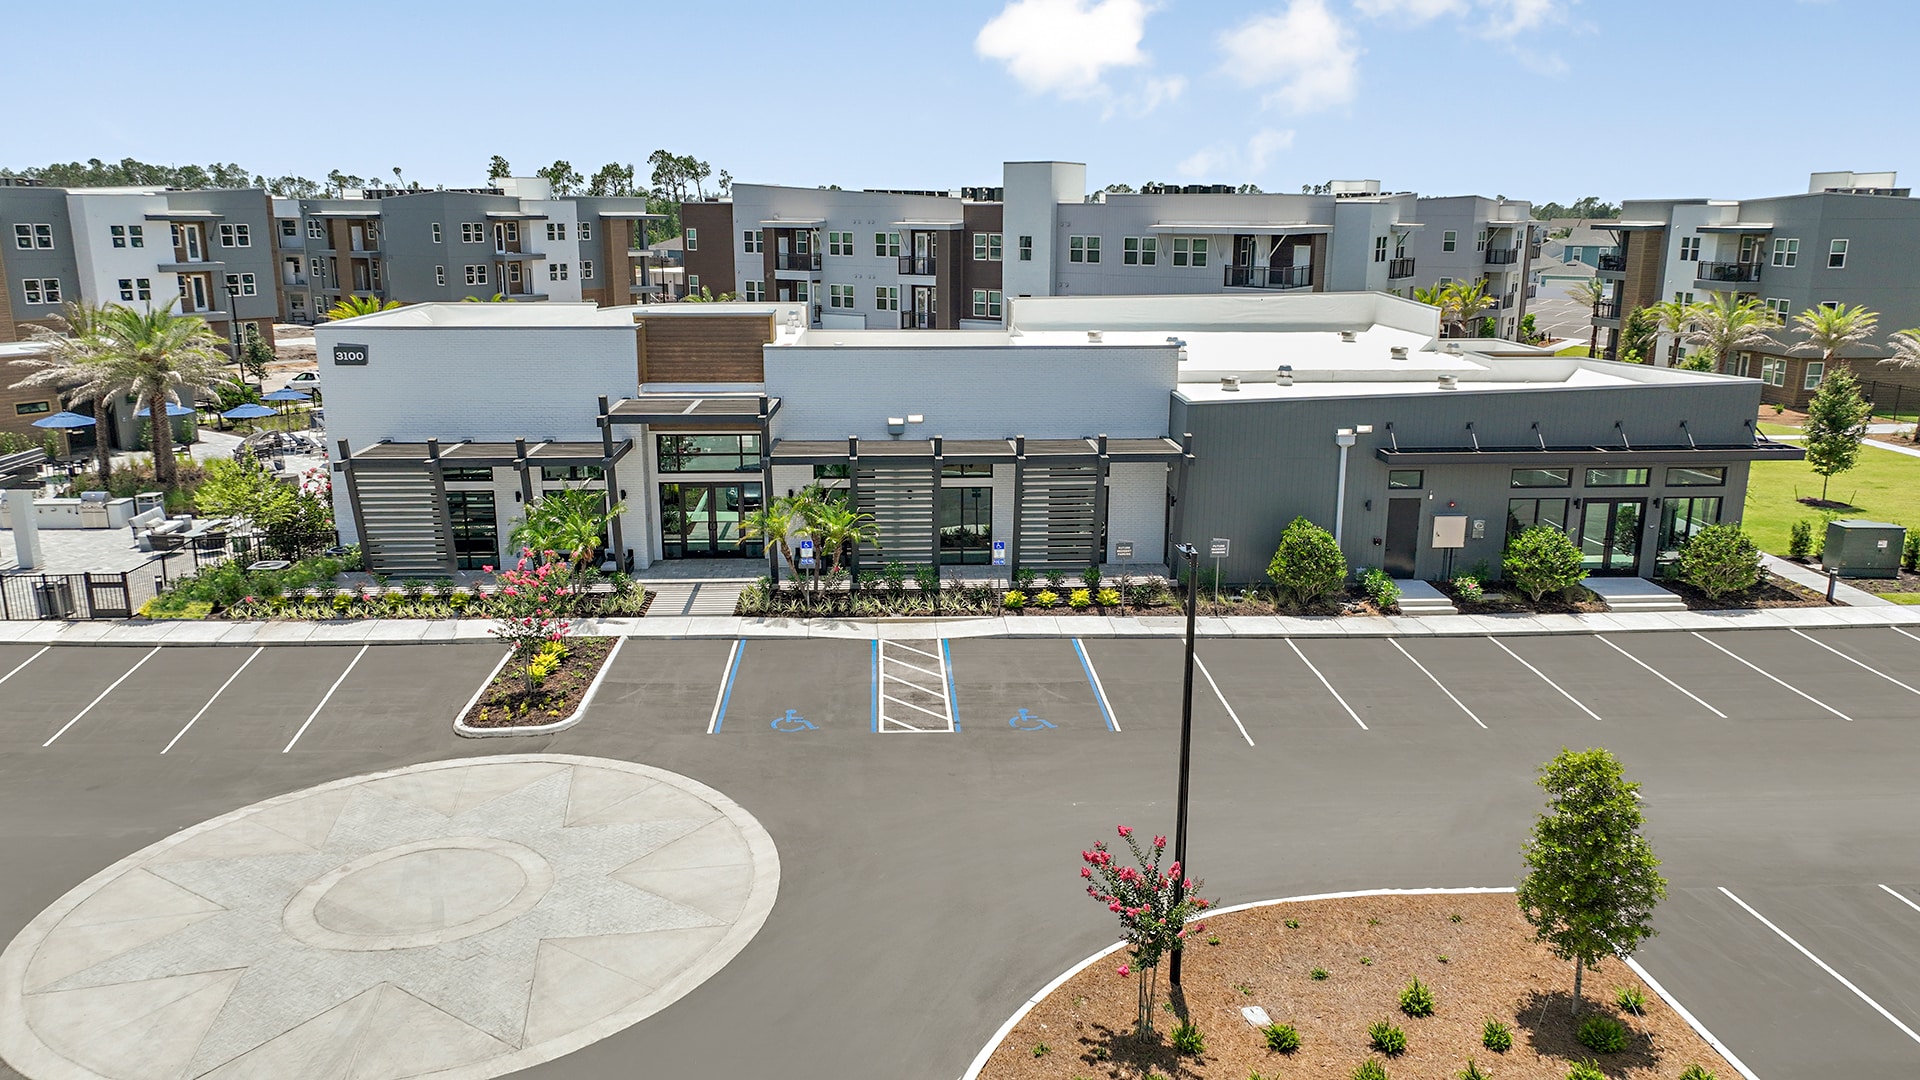 An aerial view of an apartment complex with a parking lot.